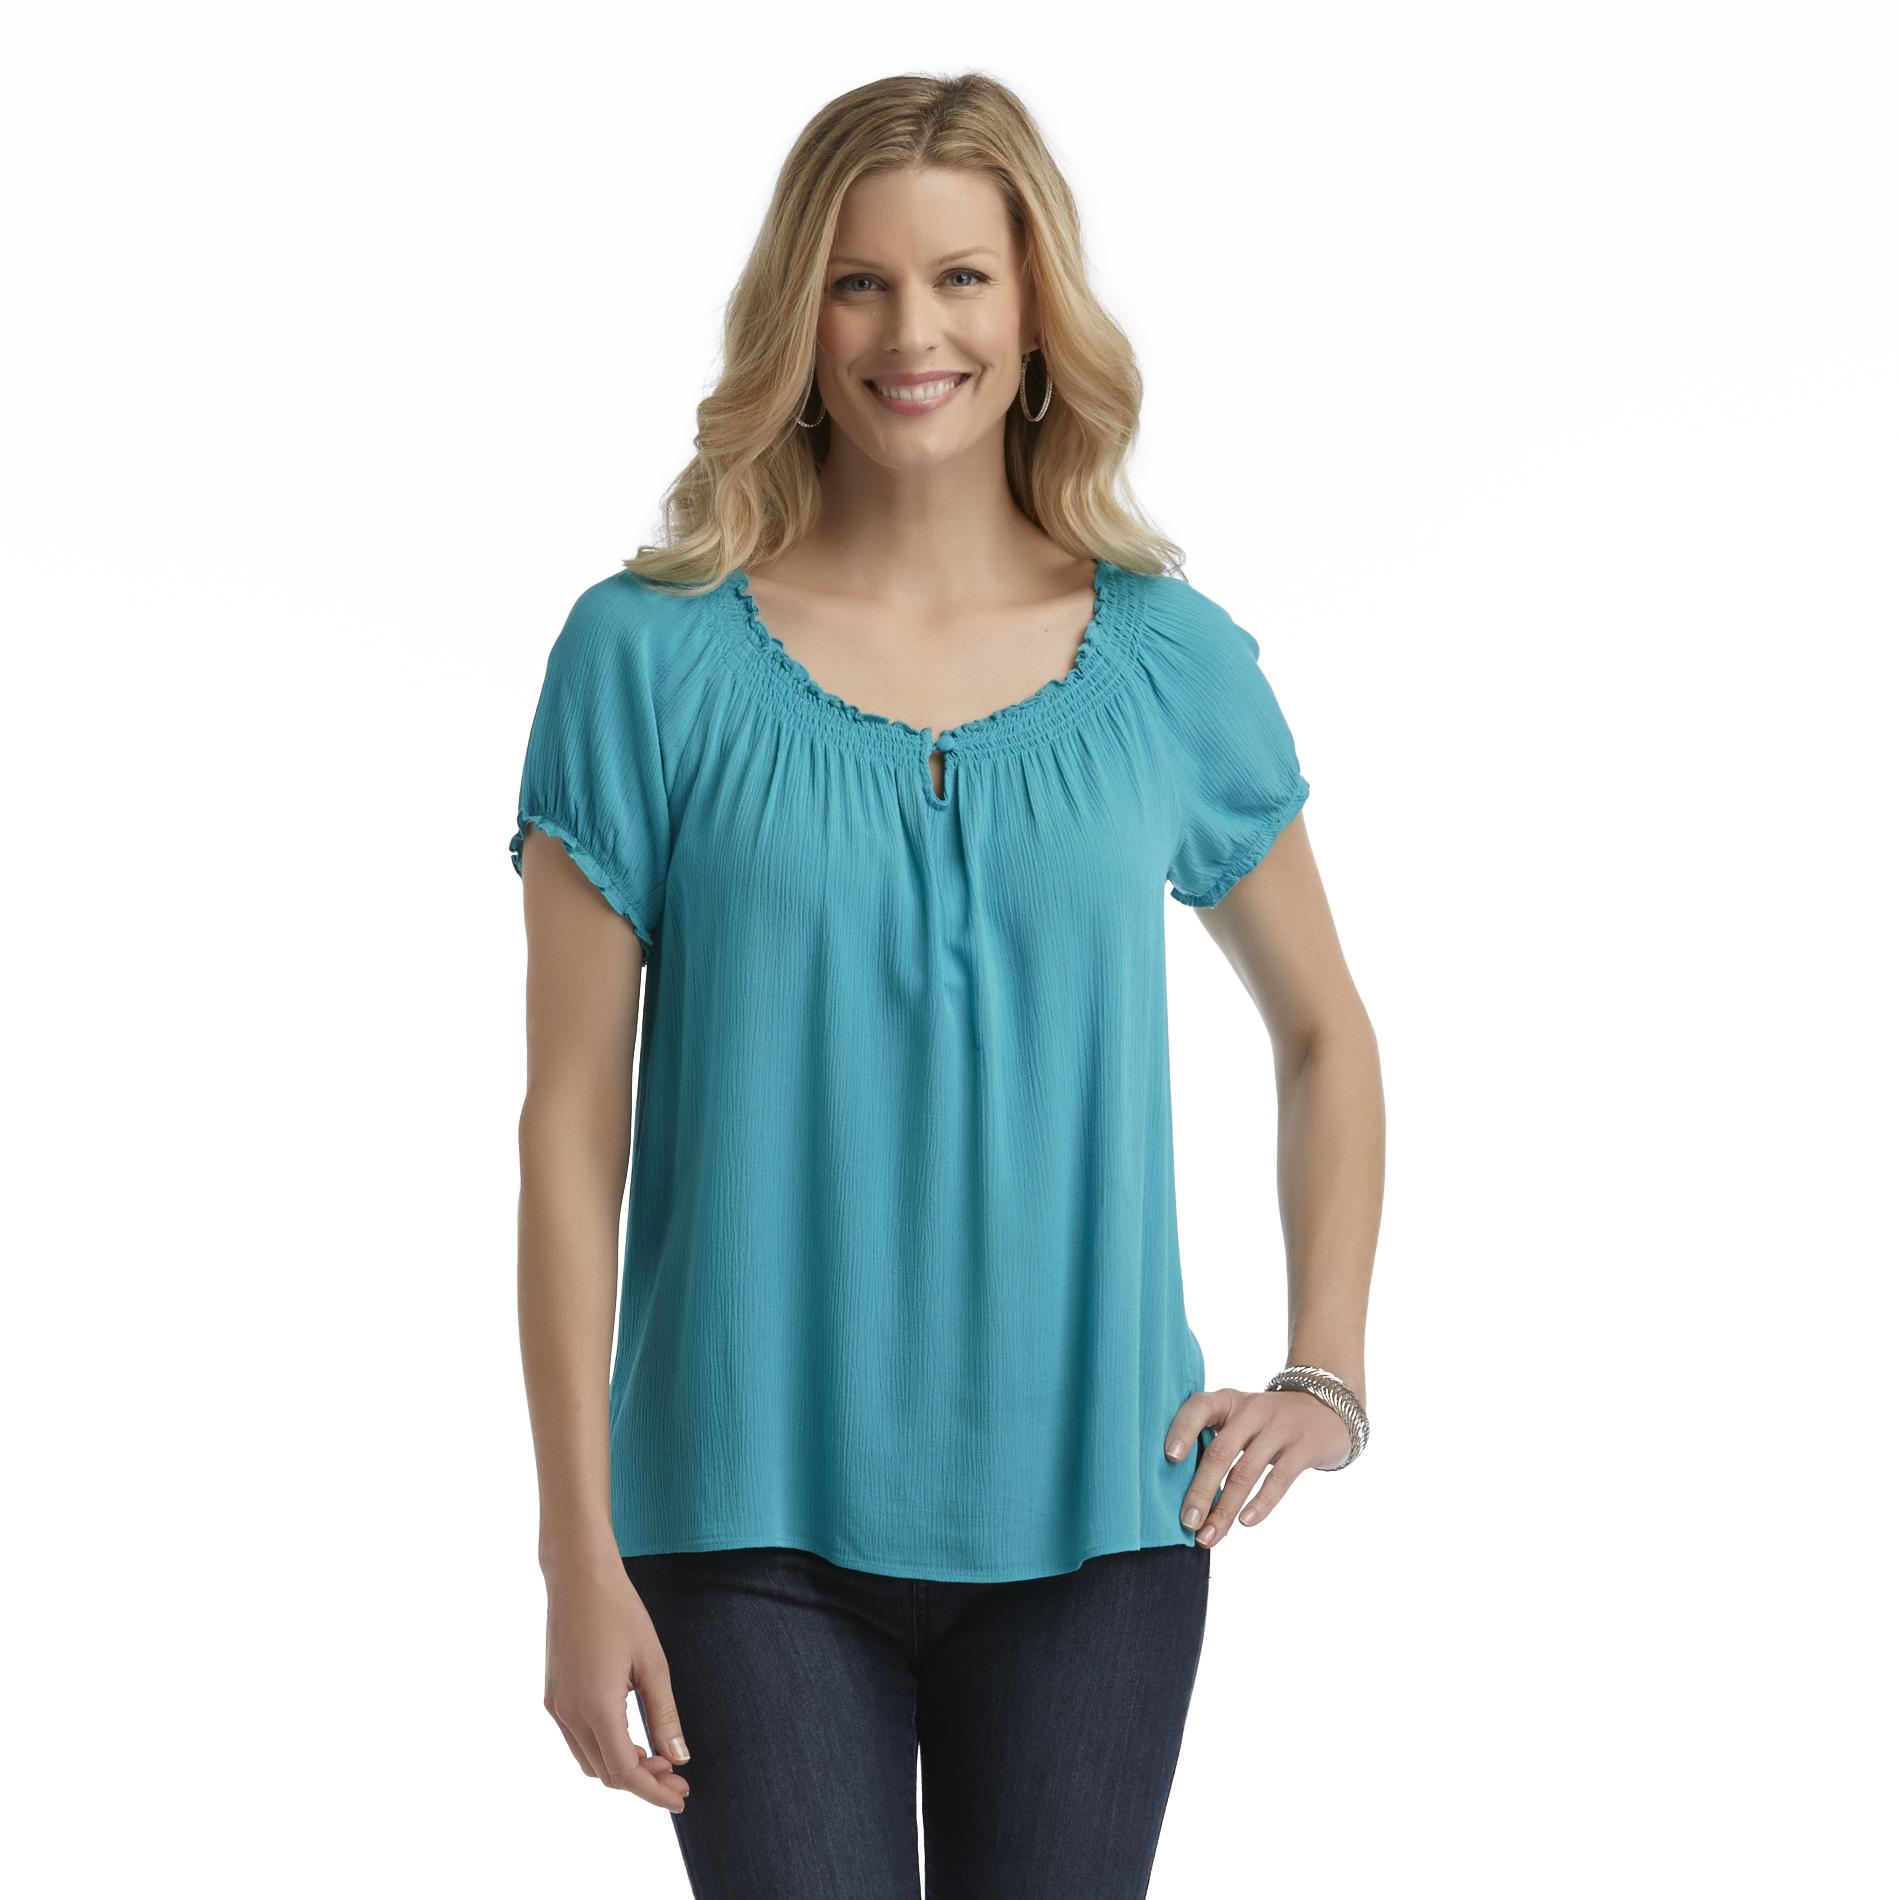 Jaclyn Smith Women's Smocked Peasant Top